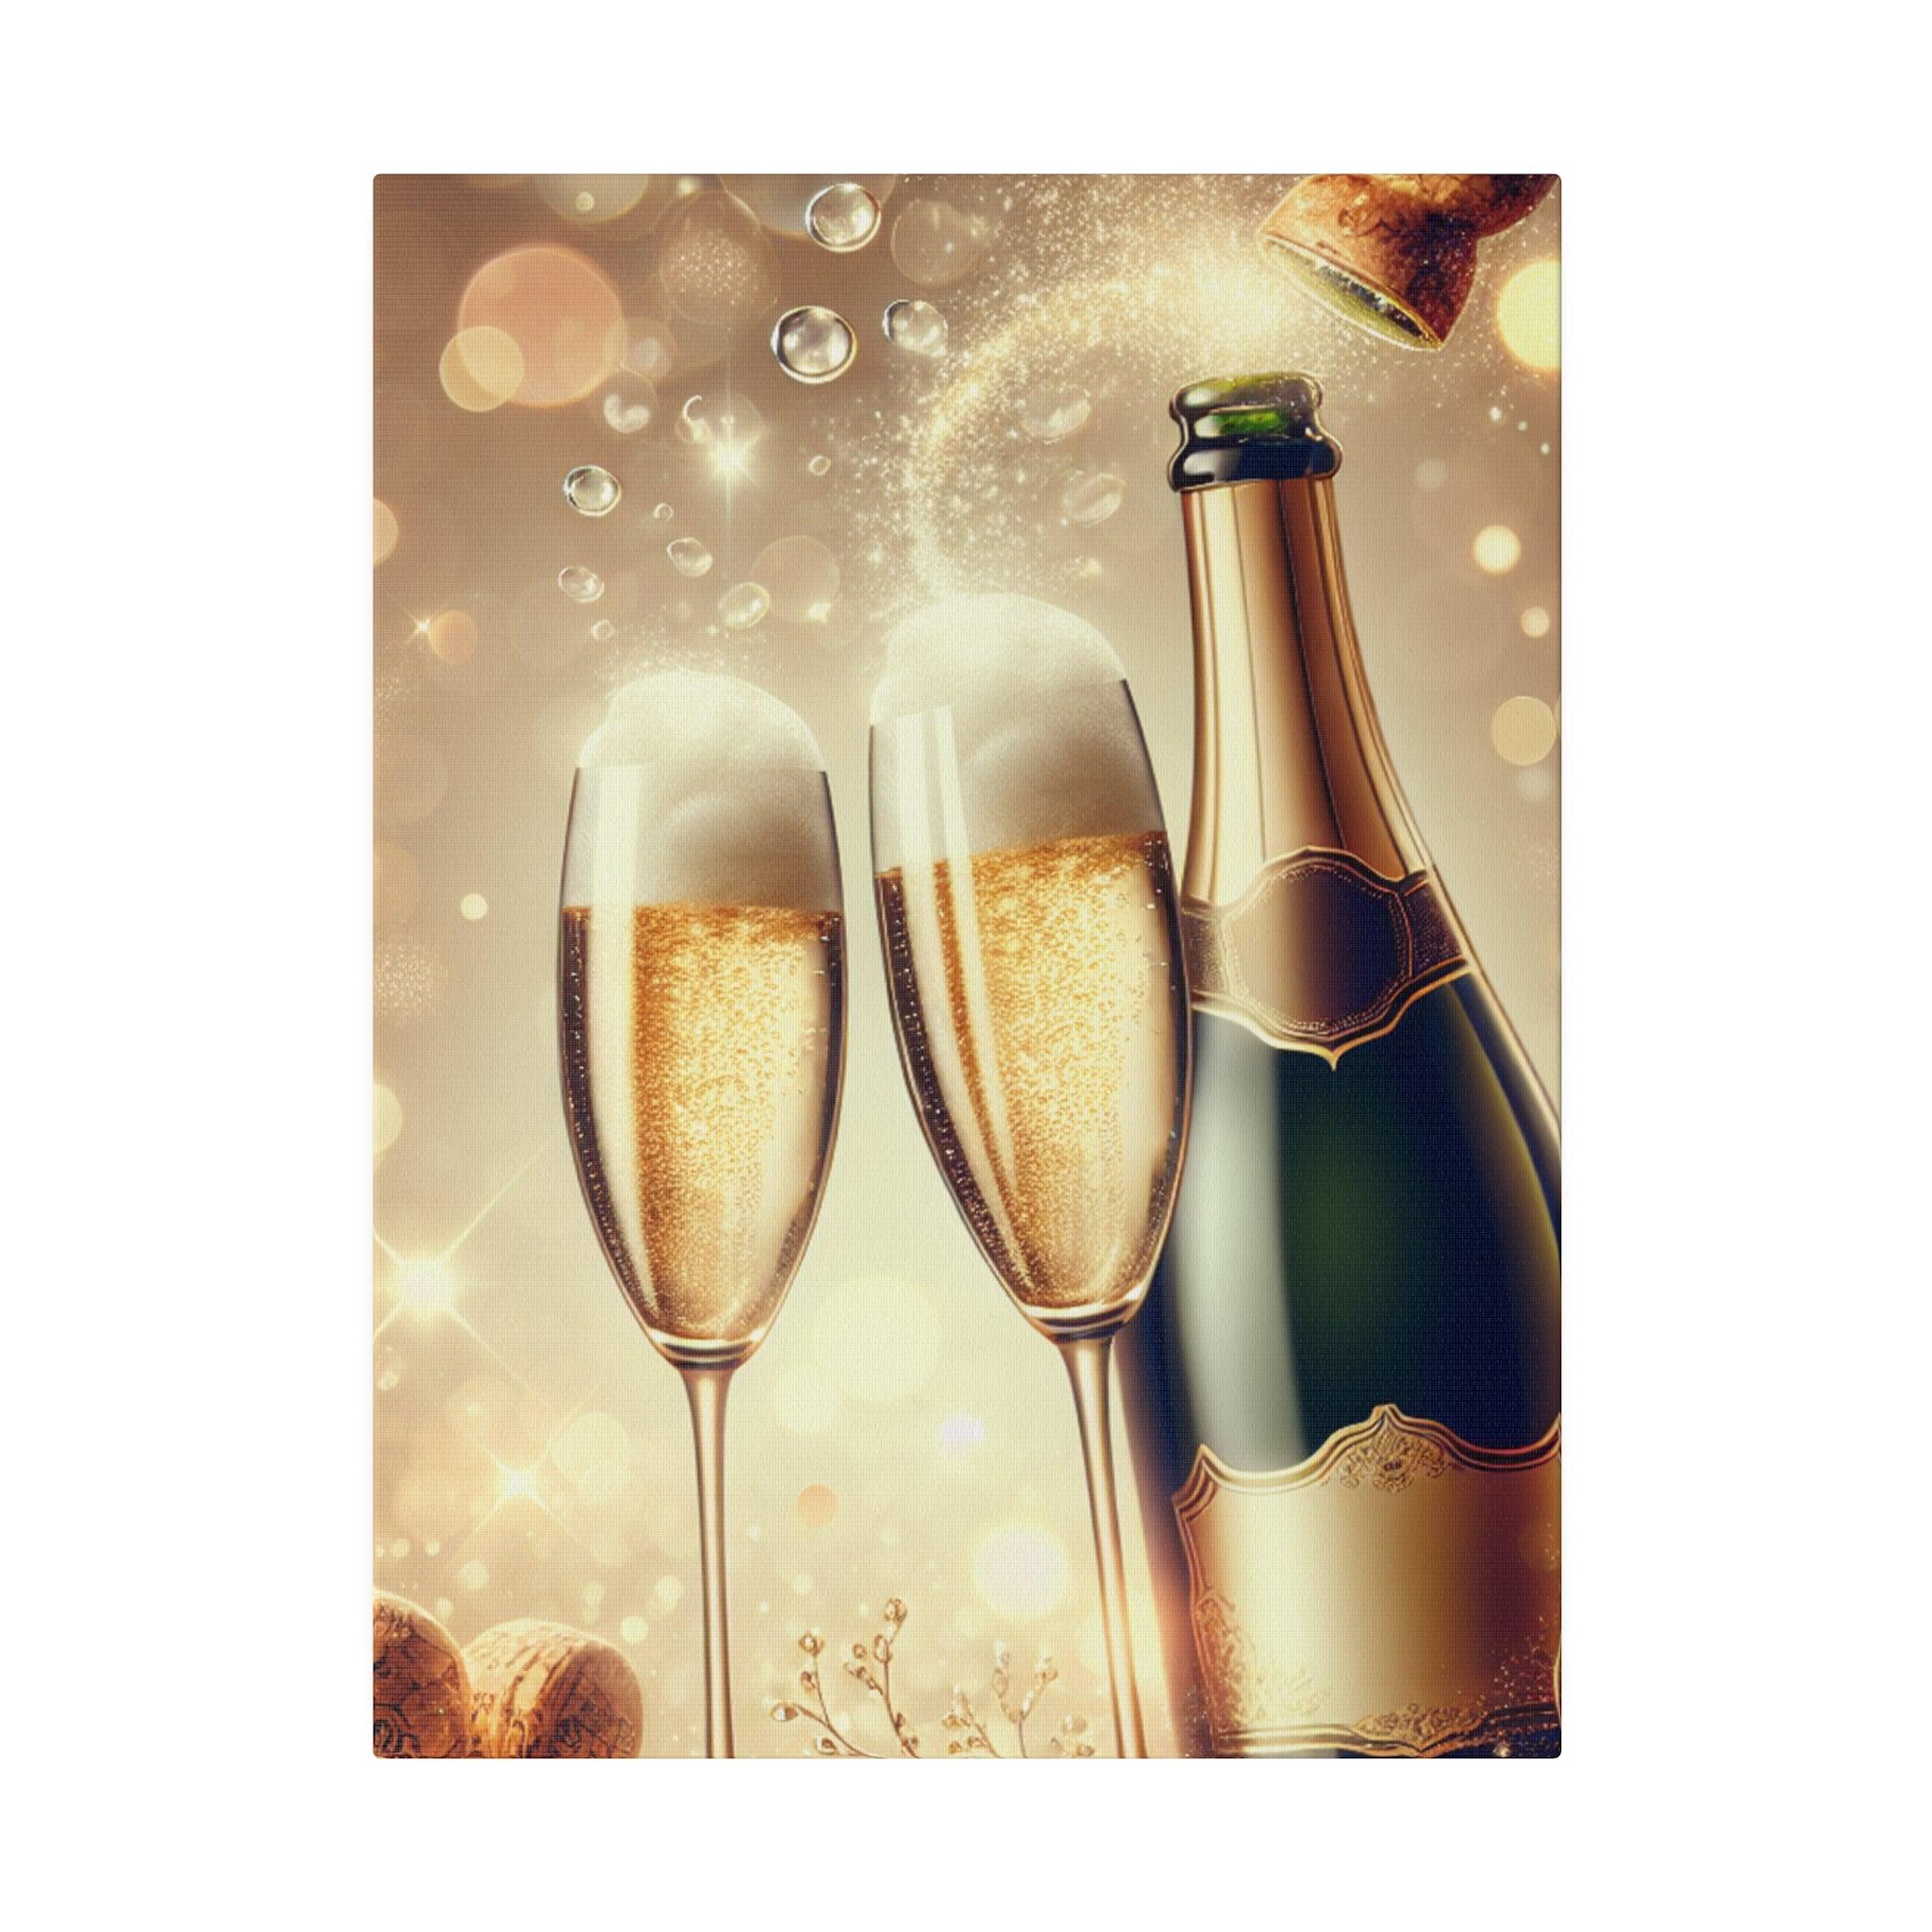 "Effervescence of Elegance: Champagne Canvas Wall Art" - The Alice Gallery